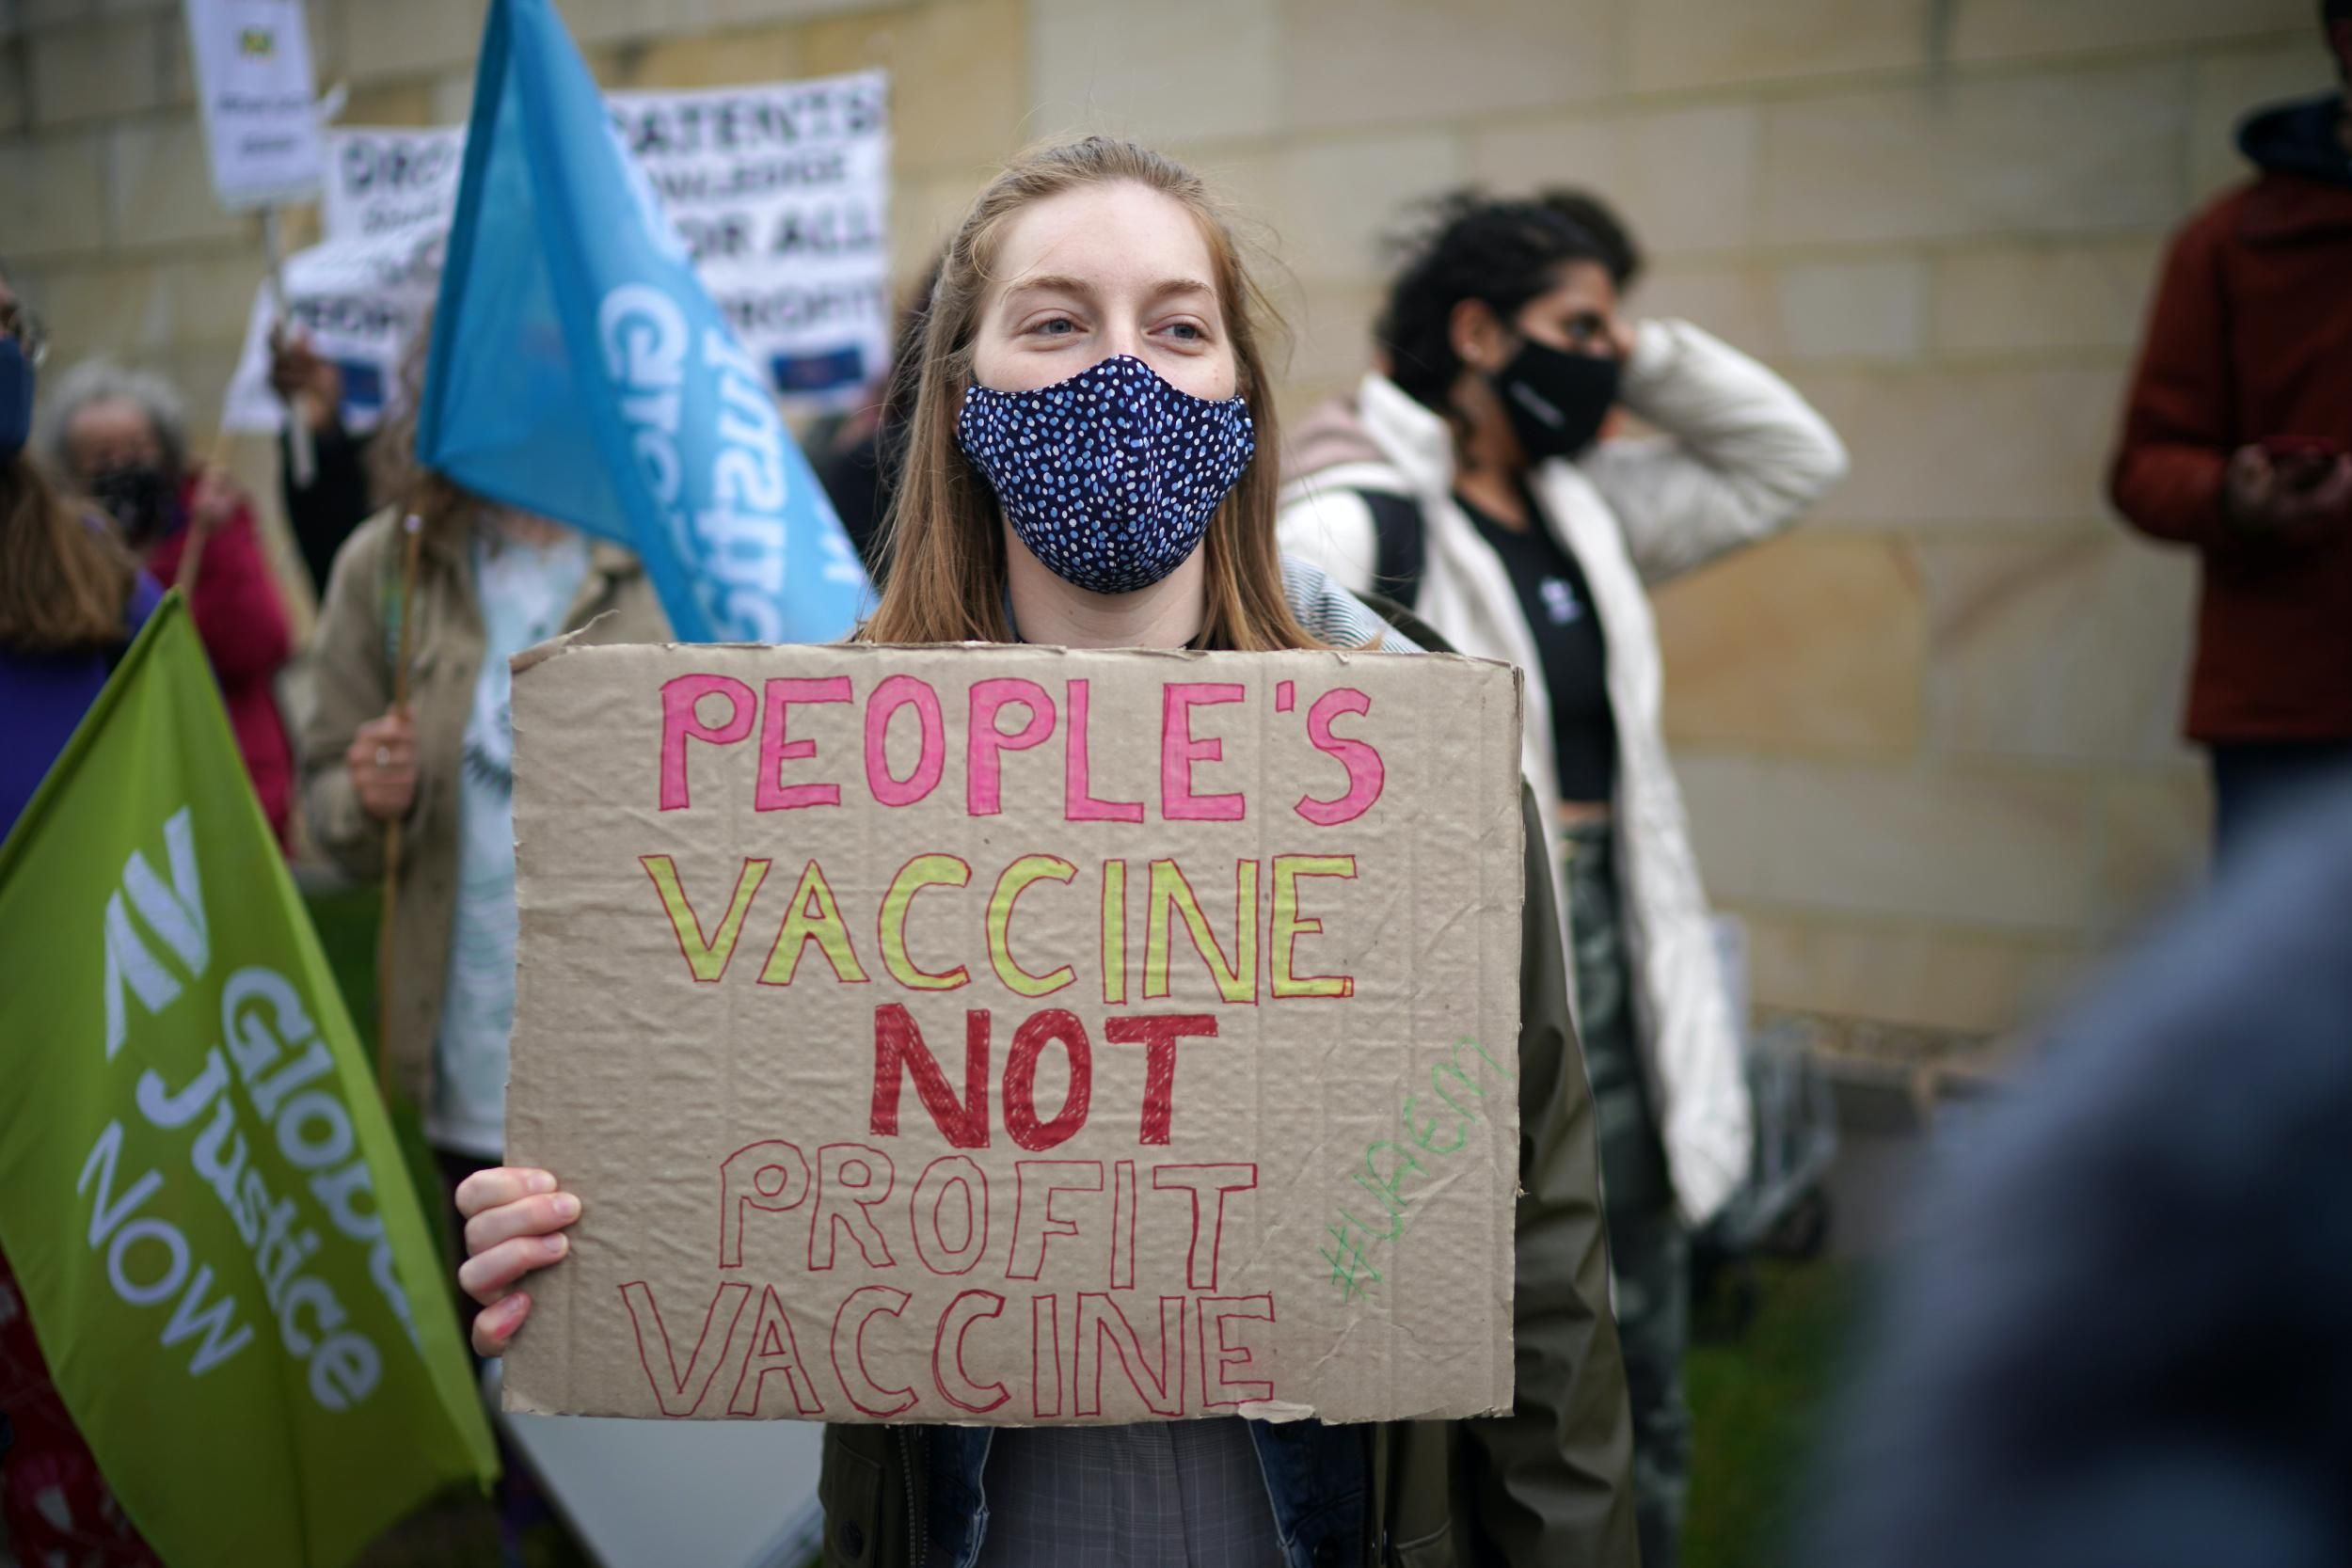 A member of the public health advocacy campaign "The People's Vaccine" protests outside an AstraZeneca site in Macclesfield, United Kingdom on May 11, 2021. The demonstrators called on the pharmaceutical giant to make the technology behind its Covid-19 vaccine free to the world. (Photo: Christopher Furlong/Getty Images) 